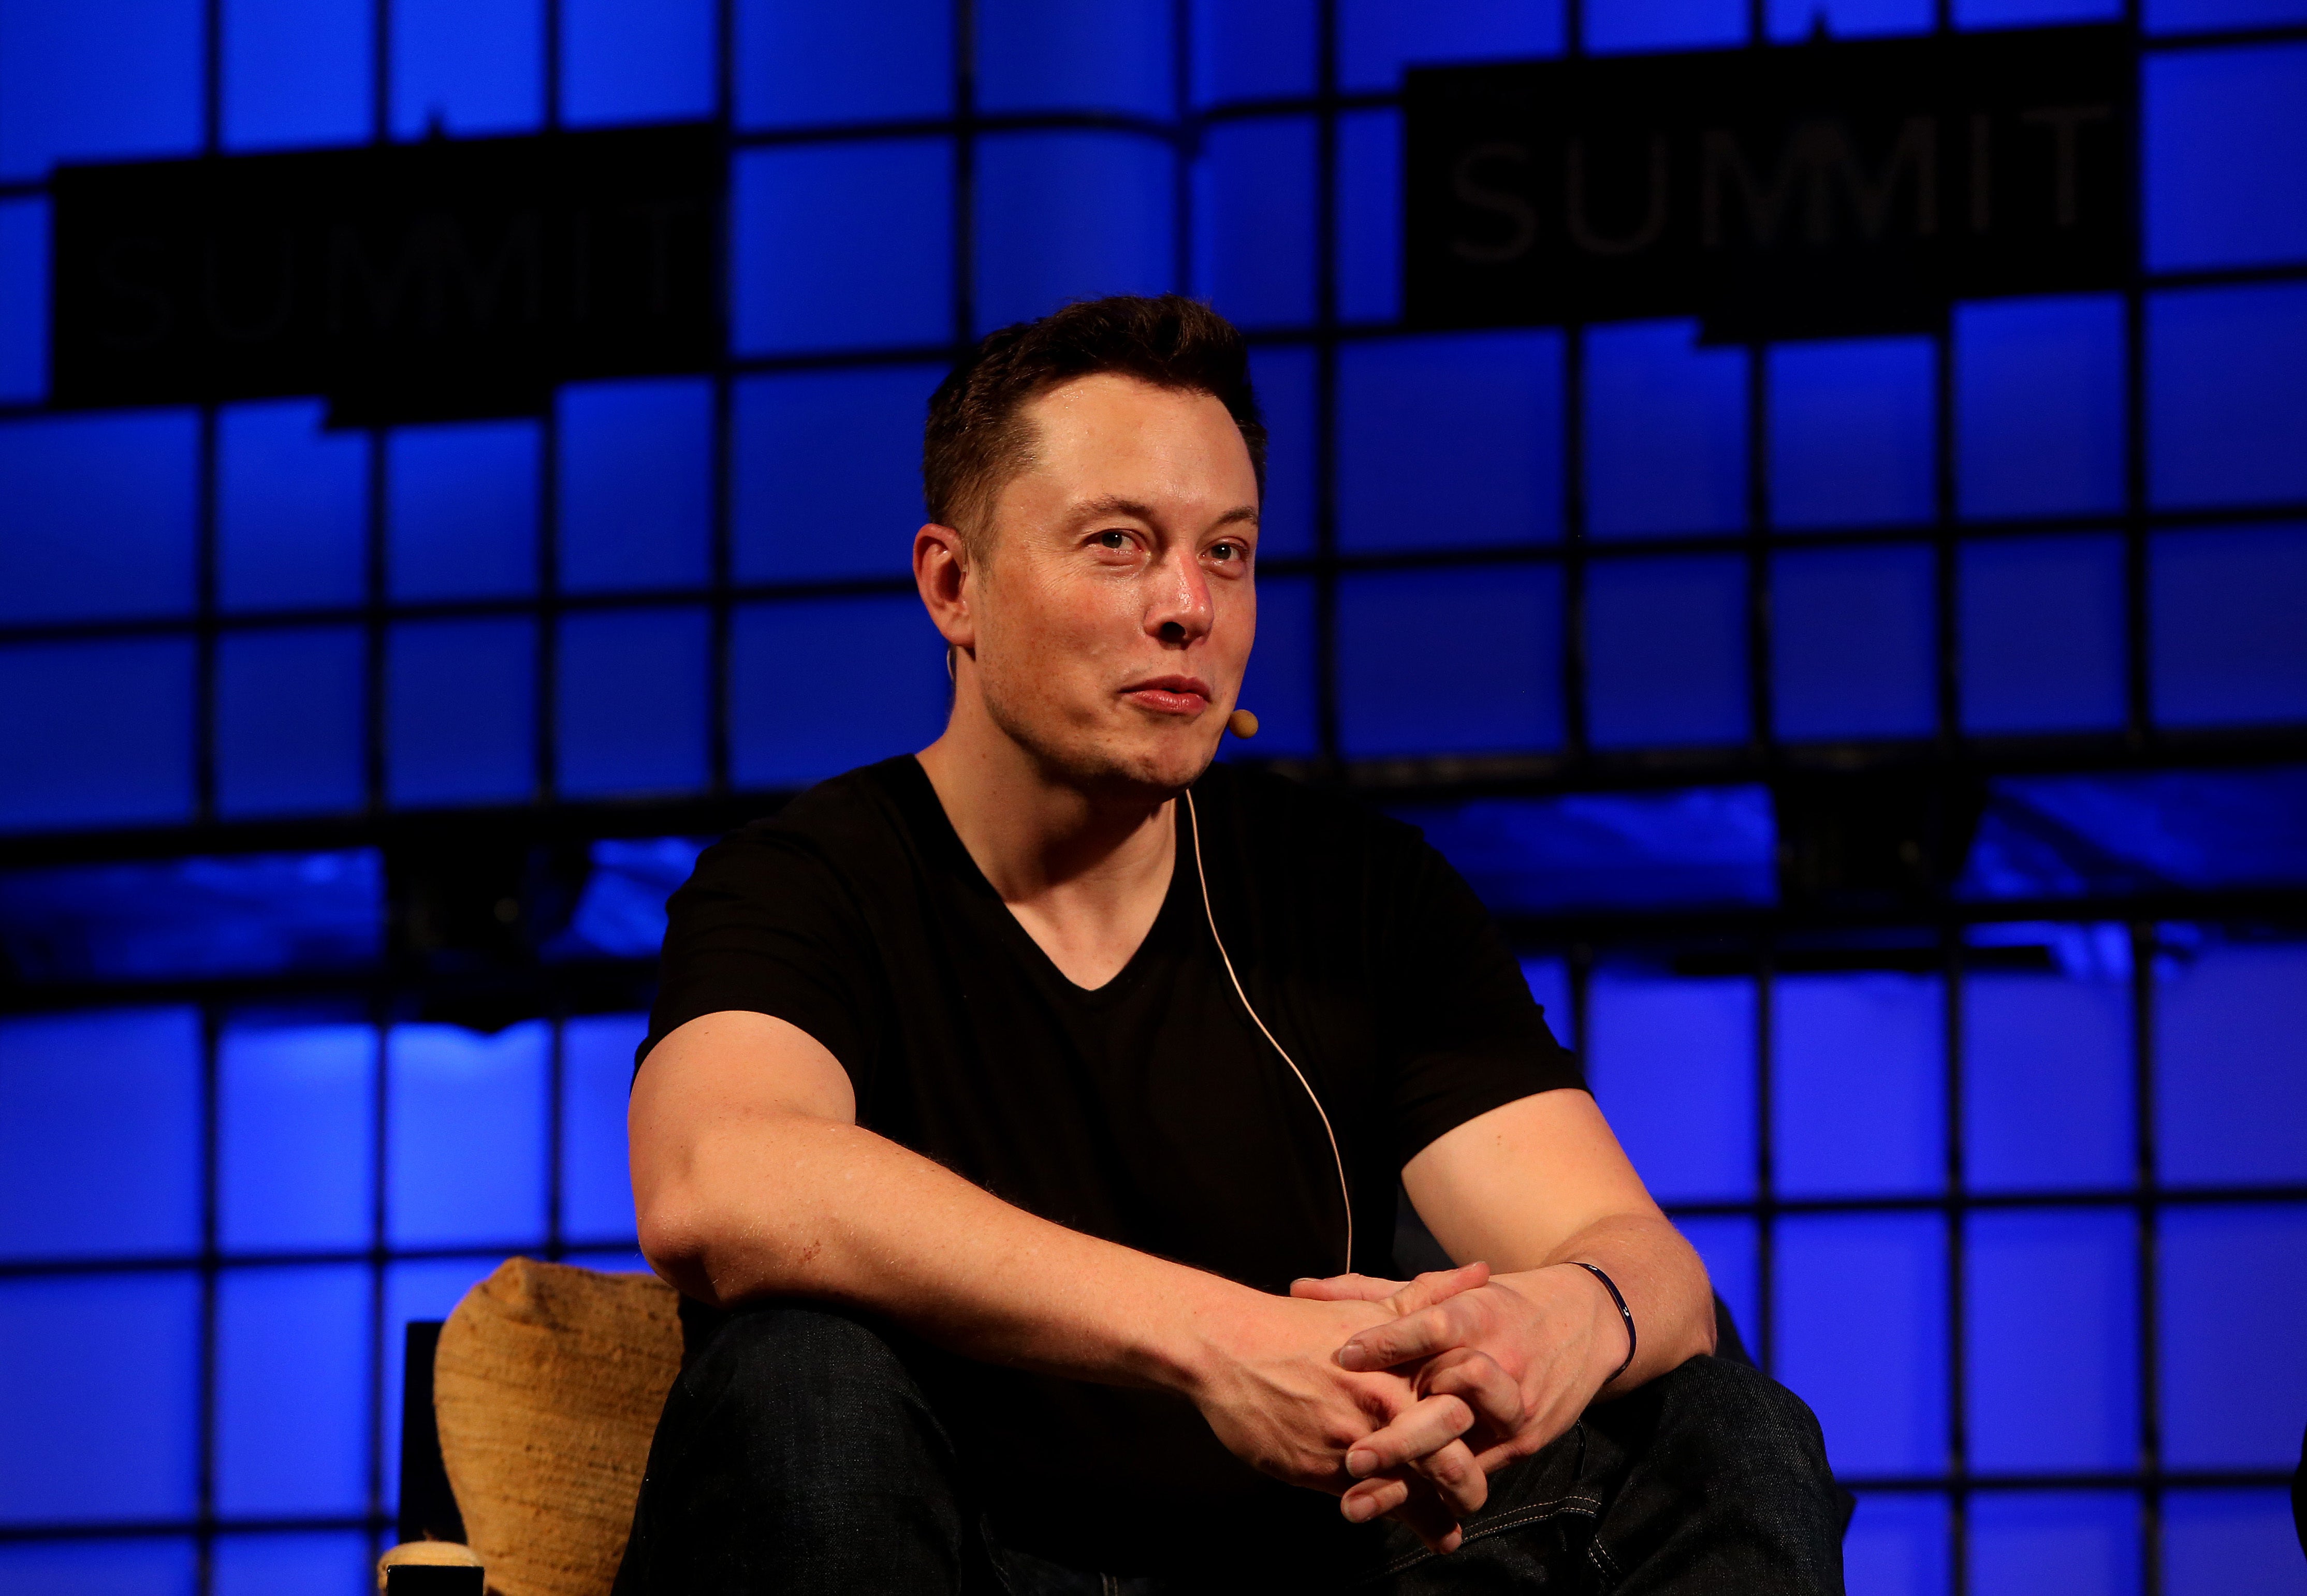 Elon Musk tweets about Japan’s declining birth rate, touching a nerve